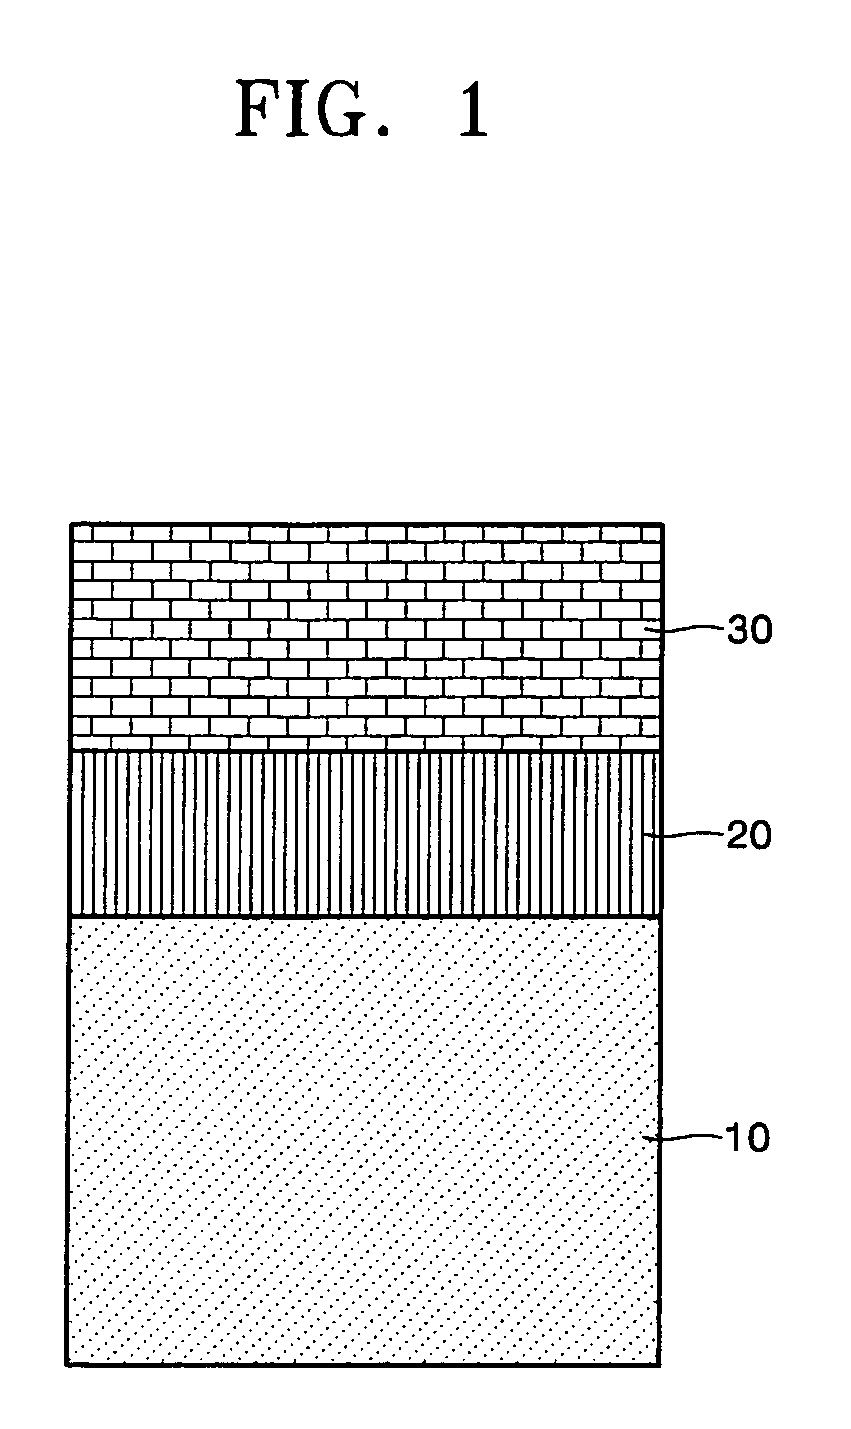 Ferroelectric/paraelectric multilayer thin film, method of forming the same, and high frequency variable device using the same